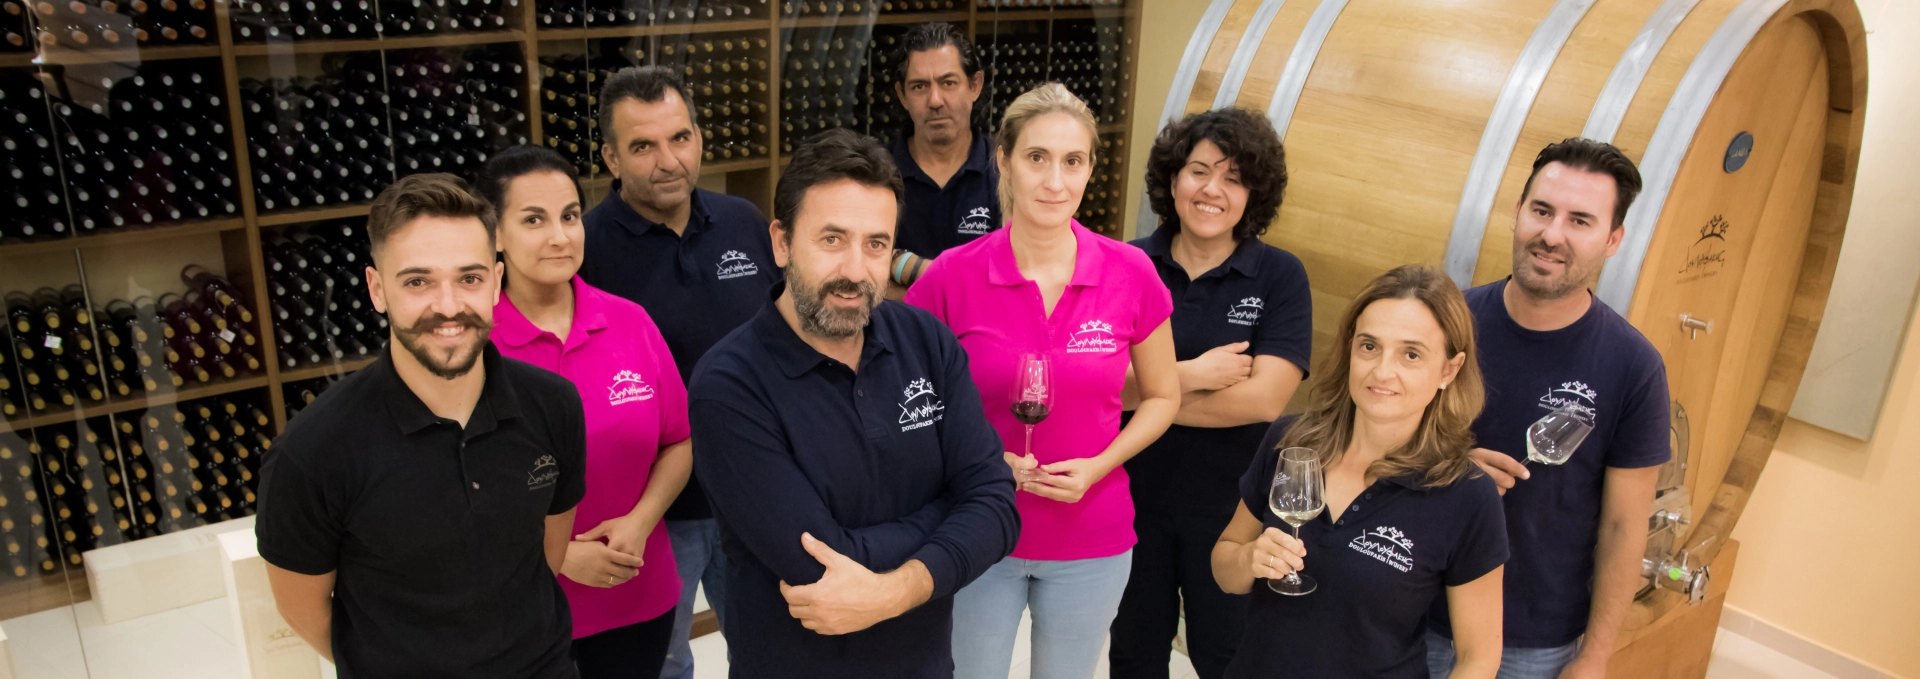 Team of  Douloufakis Winery from Dafnes, Crete, Greece